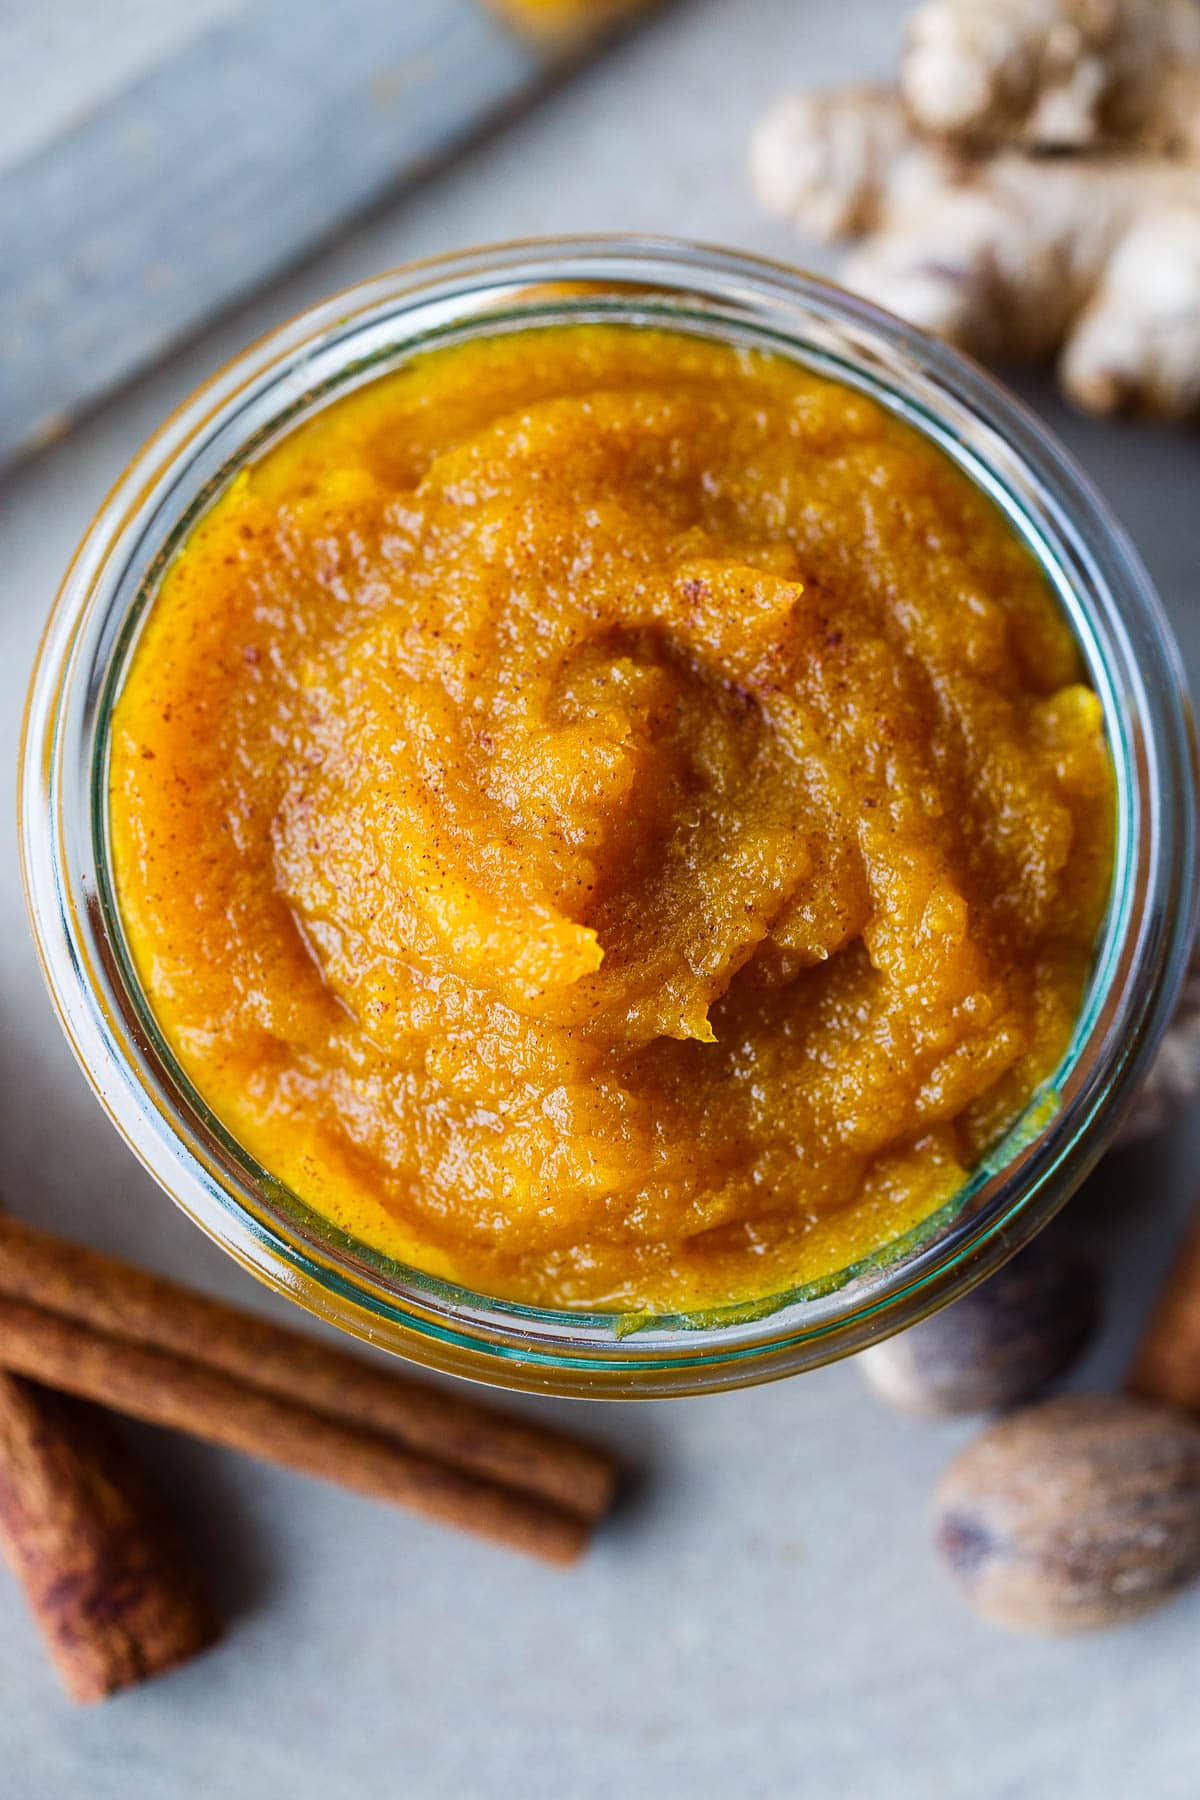 Homemade Pumpkin Butter made from scratch with fresh pumpkin - simple, healthy and delicious with many ways to use it! Vegan. 